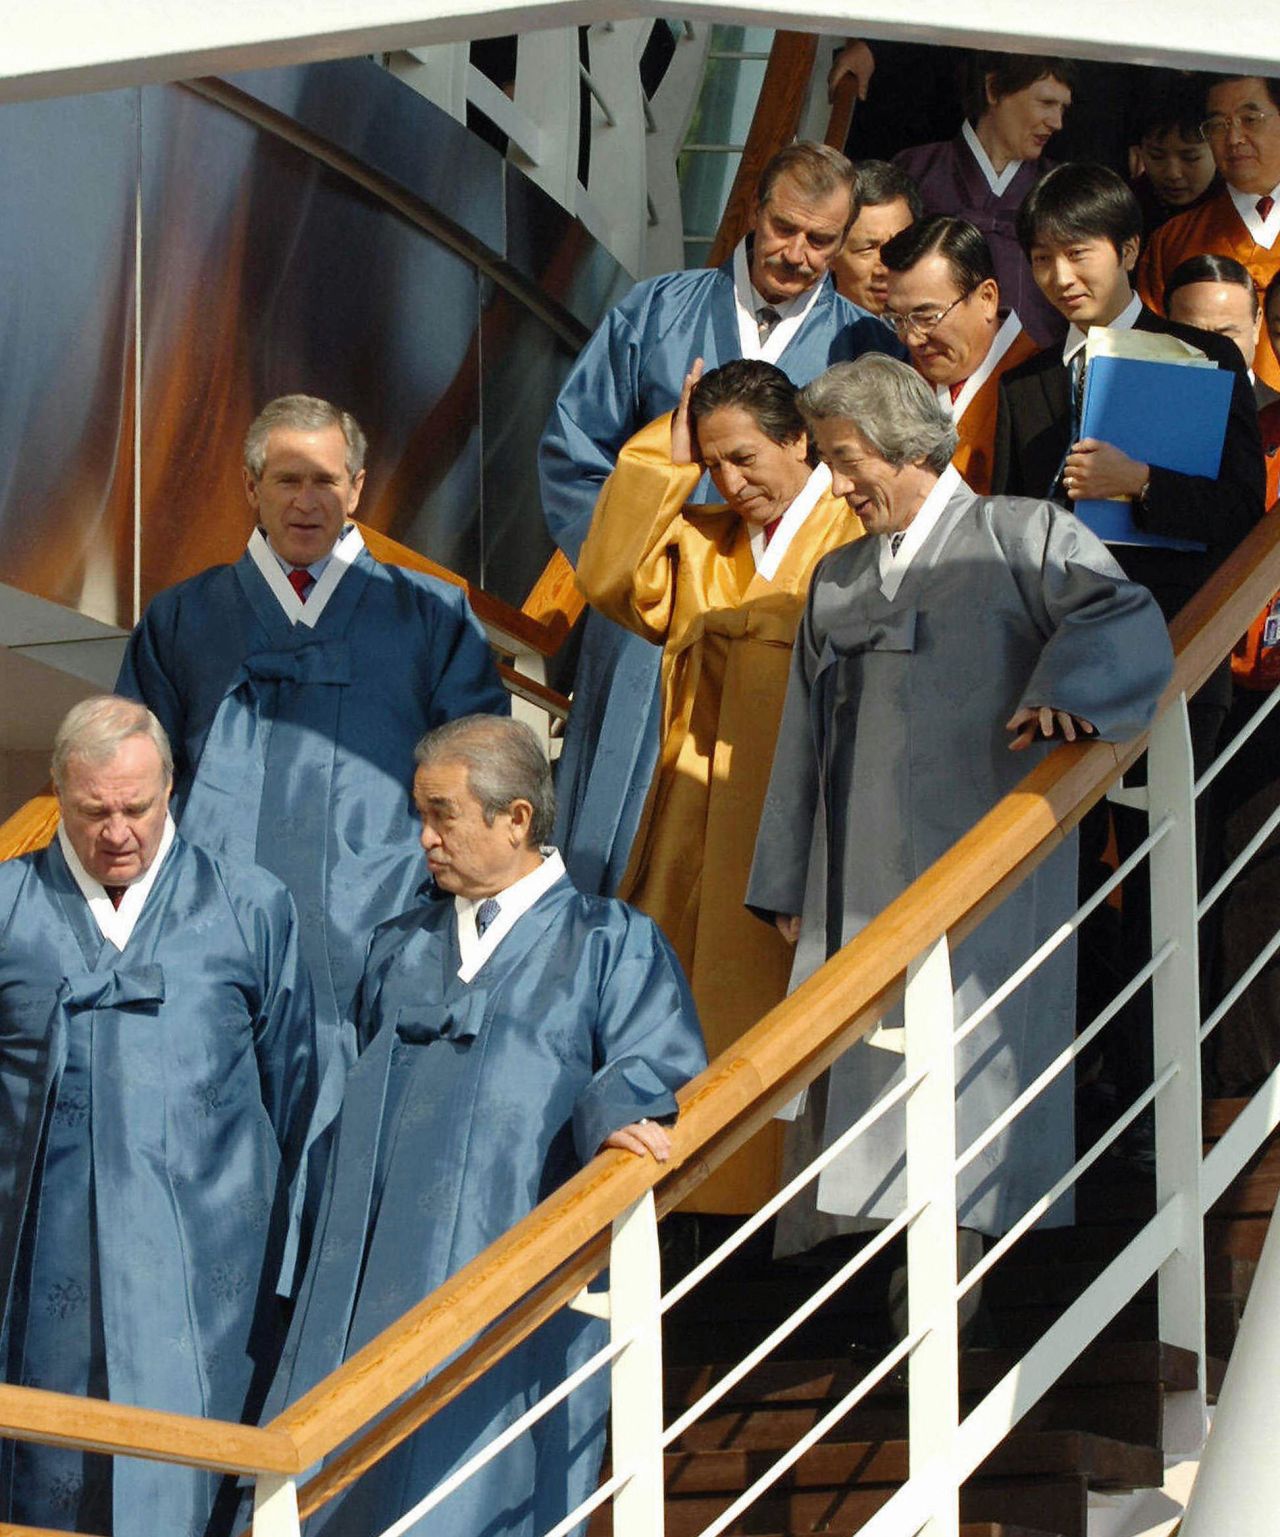 In Busan (2005), South Korea, APEC members <a href="http://www.apec.org/About-Us/About-APEC/History.aspx" target="_blank" target="_blank">agreed to confront pandemic health threats</a>, such as bird flu, and to appear not at all uncomfortable with the high-waisted flair of traditional Korean hanbok.